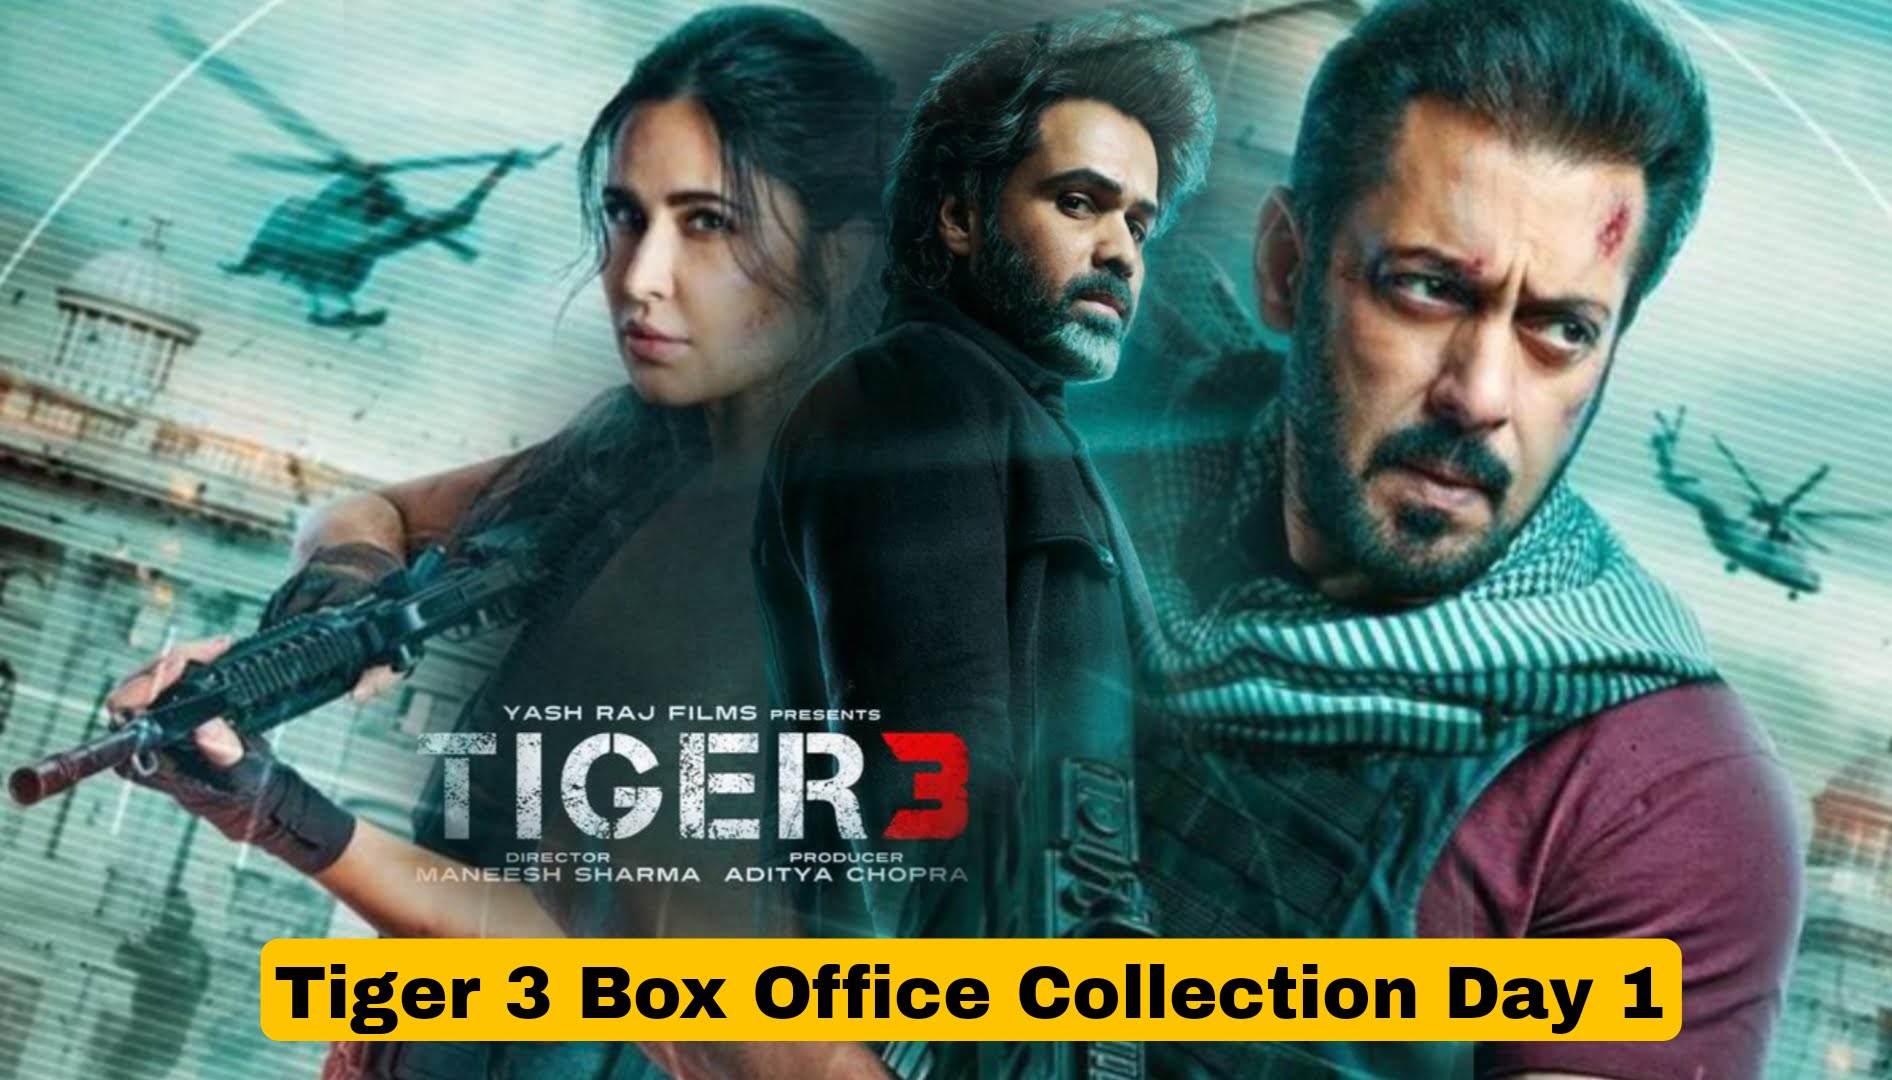 Tiger 3 Box Office Collection Day 1